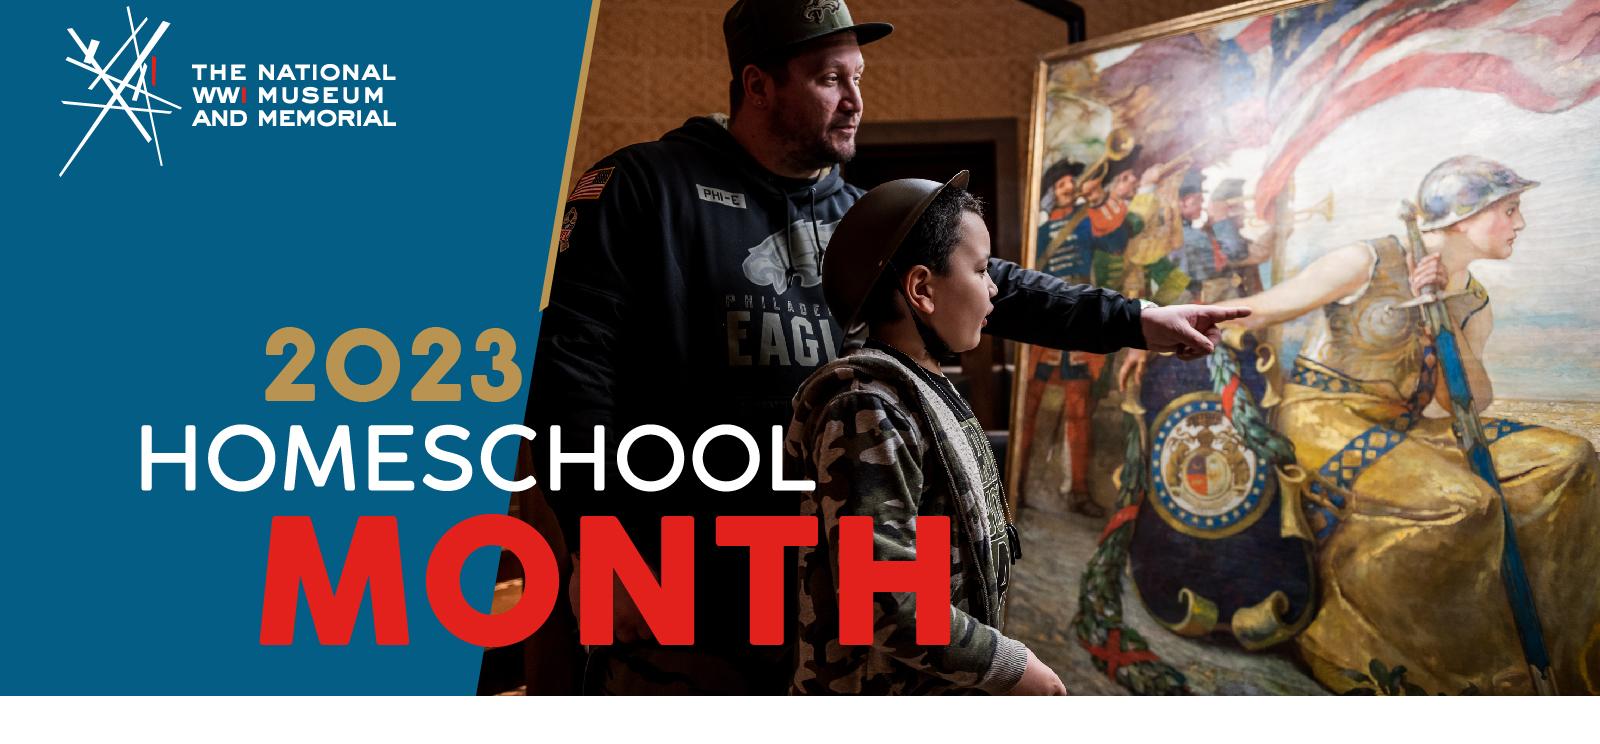 Image: Modern photograph of a man and a child viewing a painting. The painting depicts a mythological woman wearing a doughboy helmet leading a group of mythological figures. The man is pointing out to the child that they are wearing the same helmet as the woman in the painting. Text: 2023 Homeschool Month